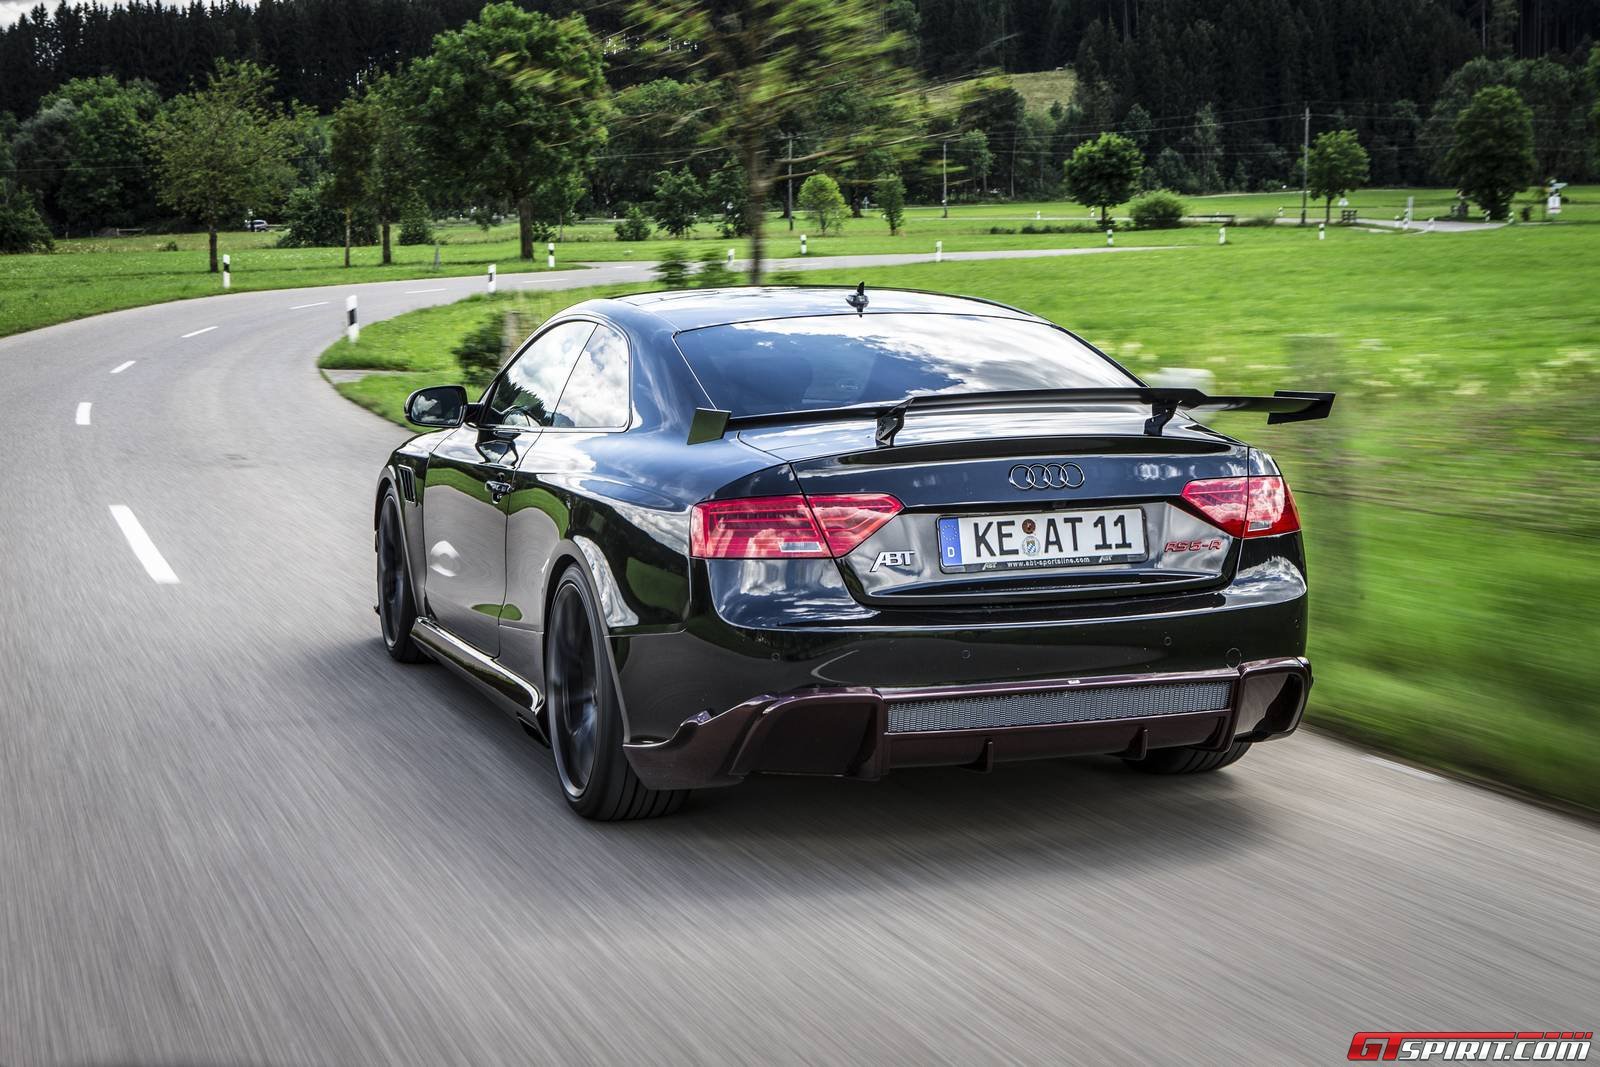 2014, Abt, Audi, Rs5 r, Tuning, Cars Wallpapers HD